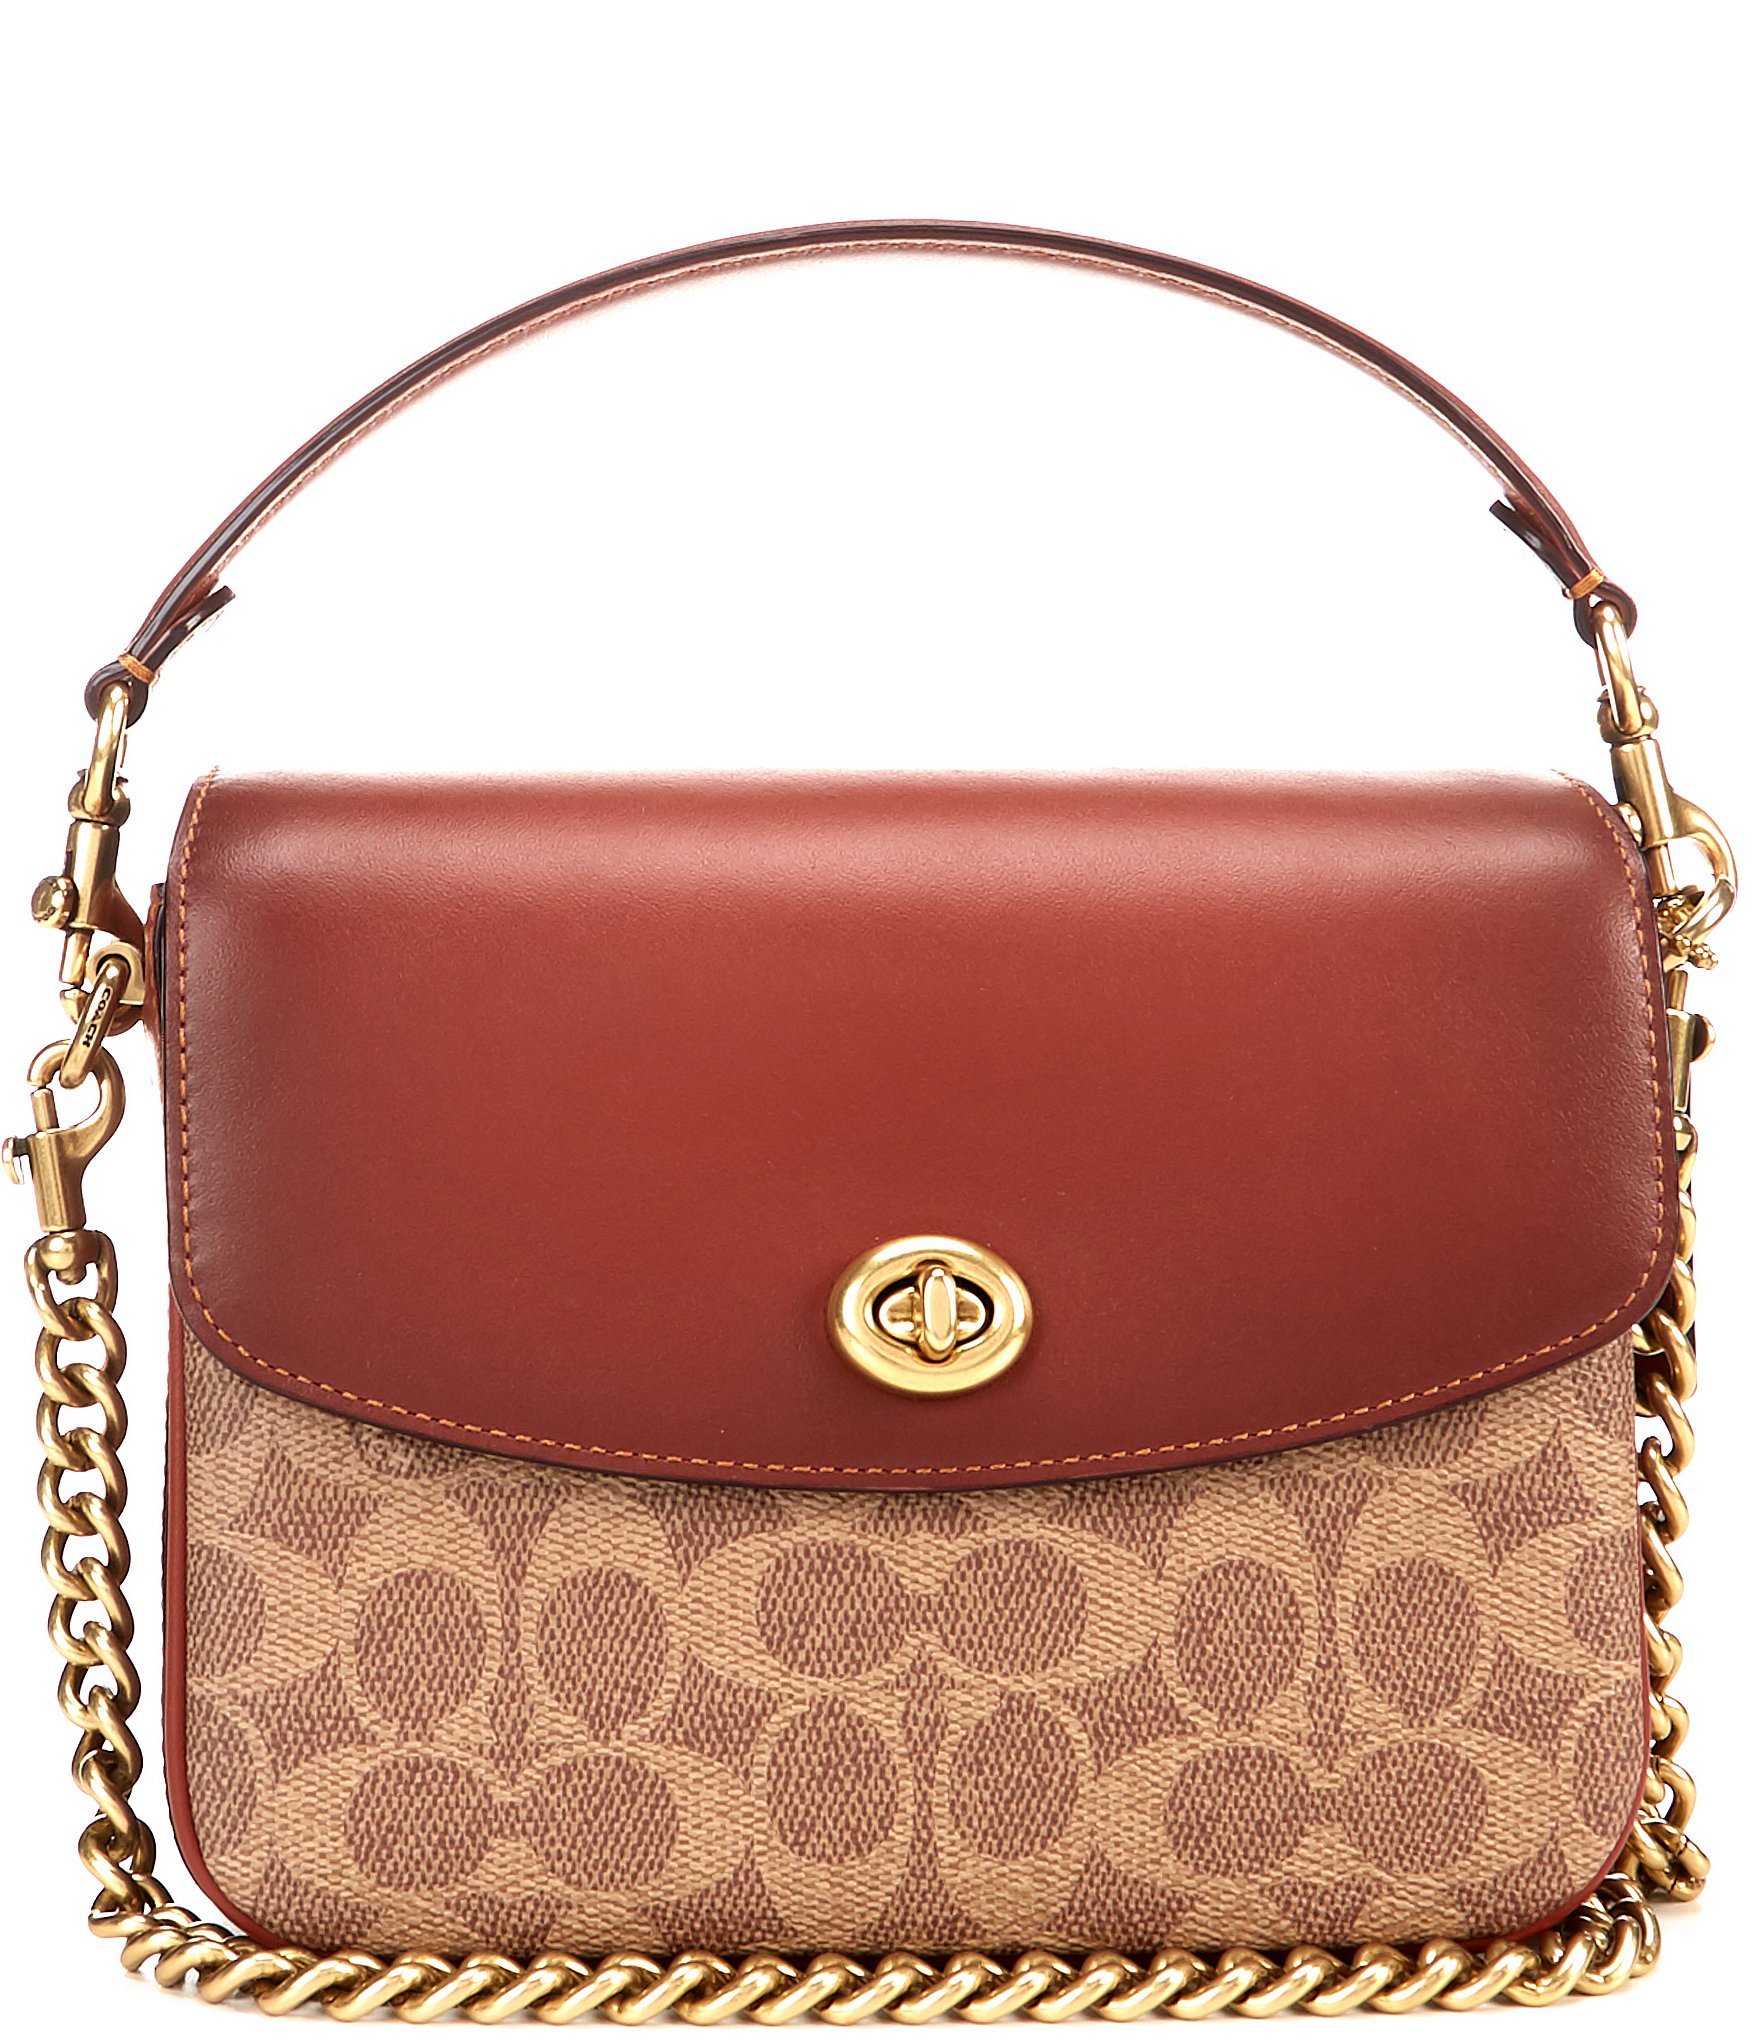 COACH Chain Crossbody Bag In Signature Canvas in Natural